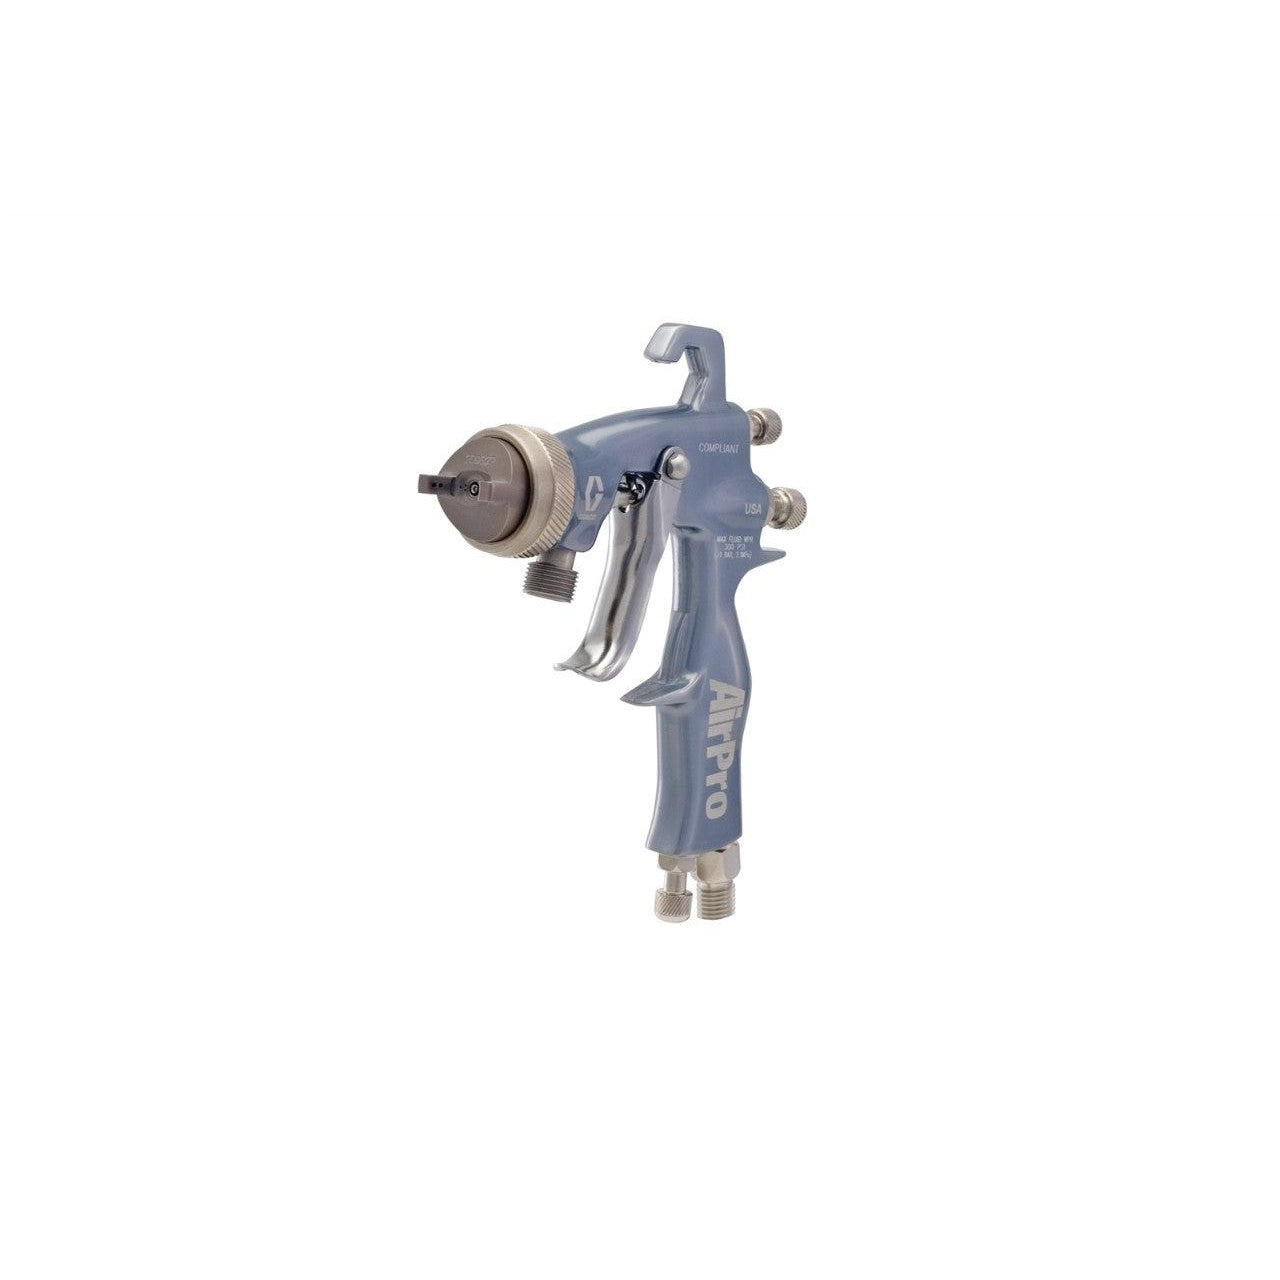 AirPro Air Spray Pressure Feed Gun, Compliant, 0.110 inch (2.8 mm) Nozzle, for General Metal Applications